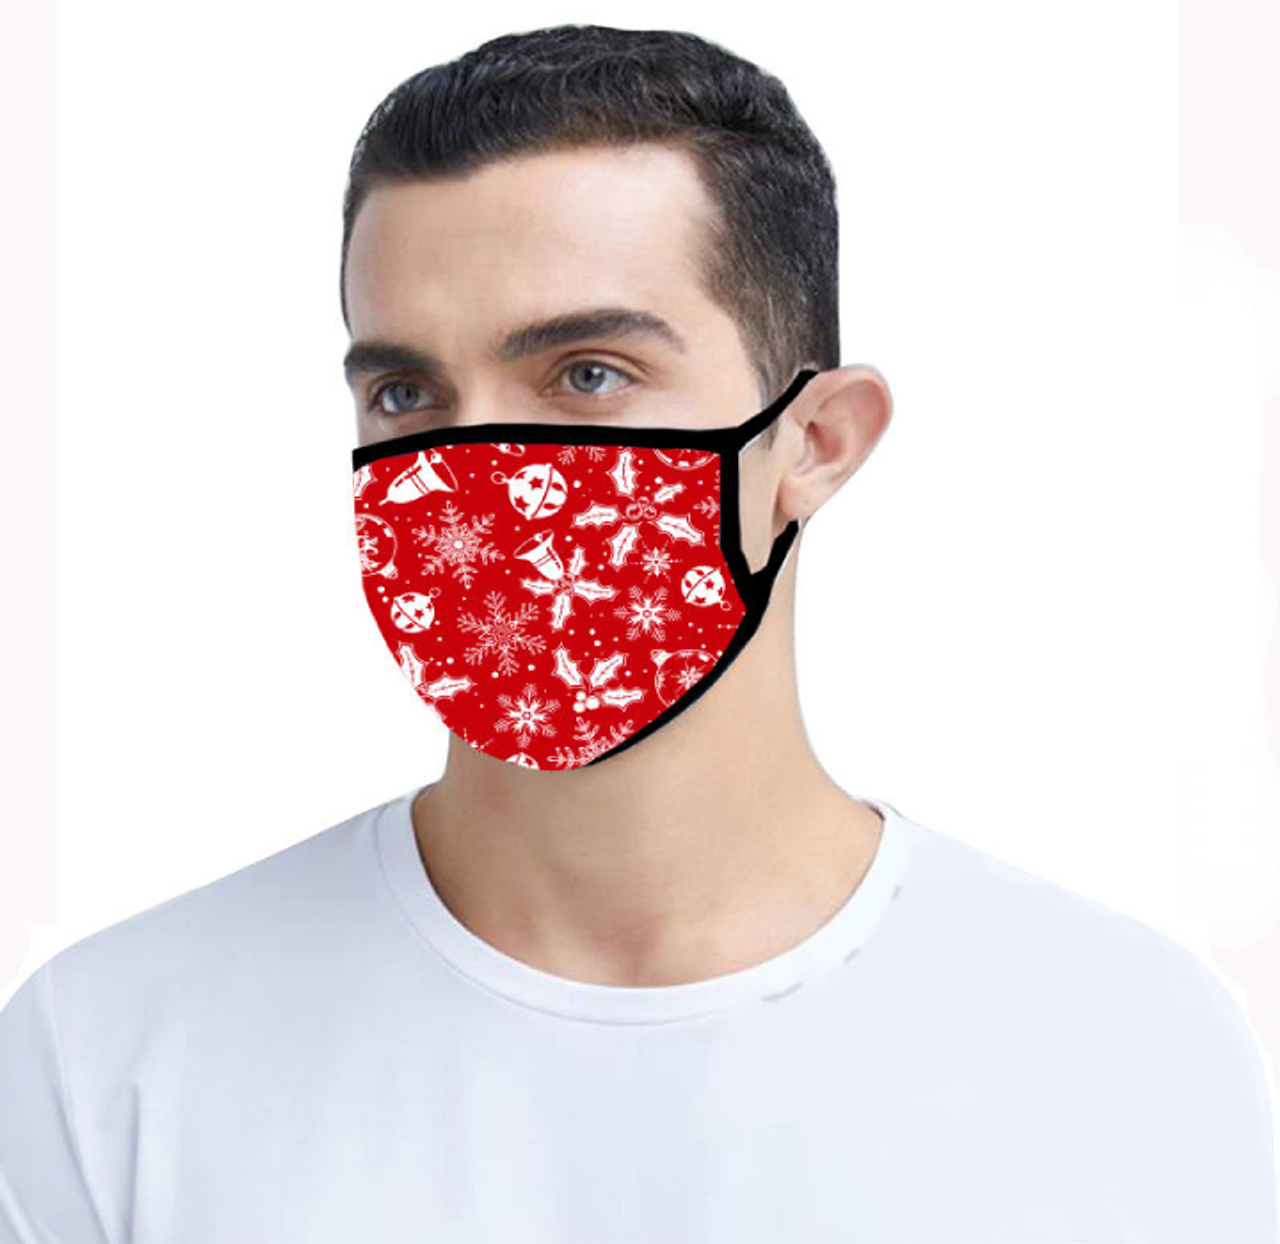 Reusable Washable Christmas-Themed Face Masks with Filters (4-Pack) product image